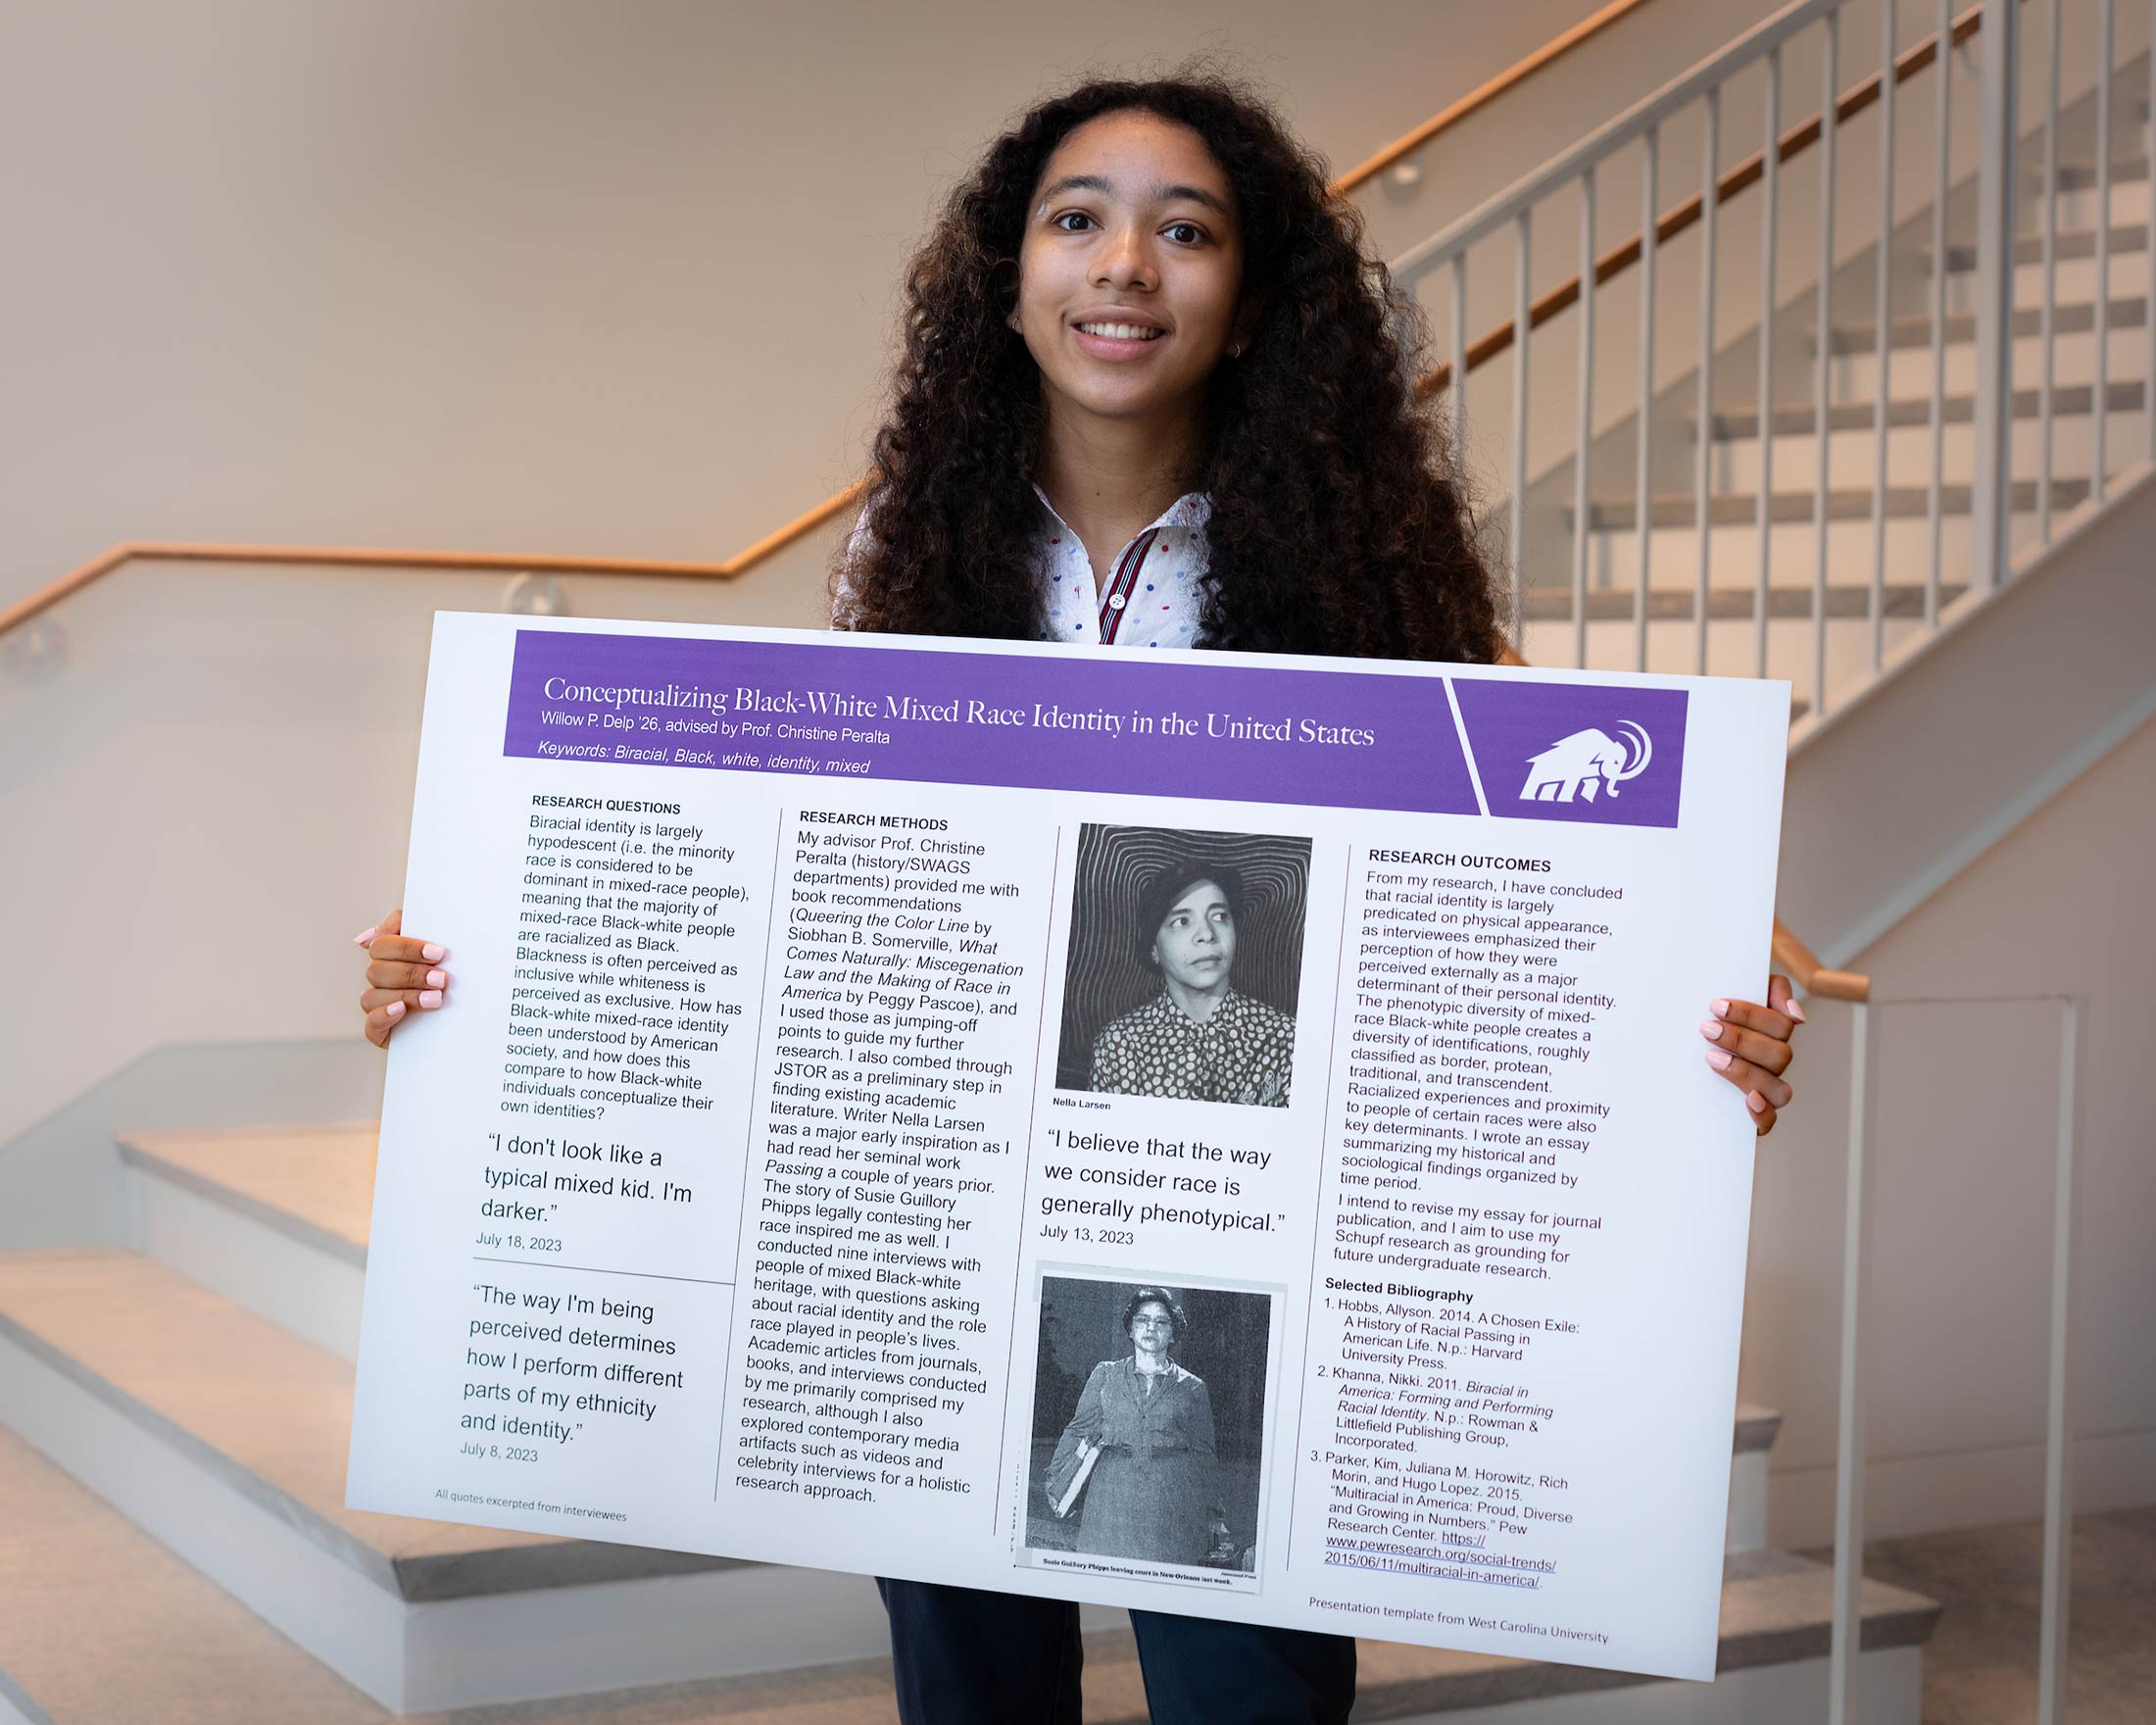 Willow Delp holds her research poster titled Conceptualizing Black-White Mixed Race Identity in the United States.